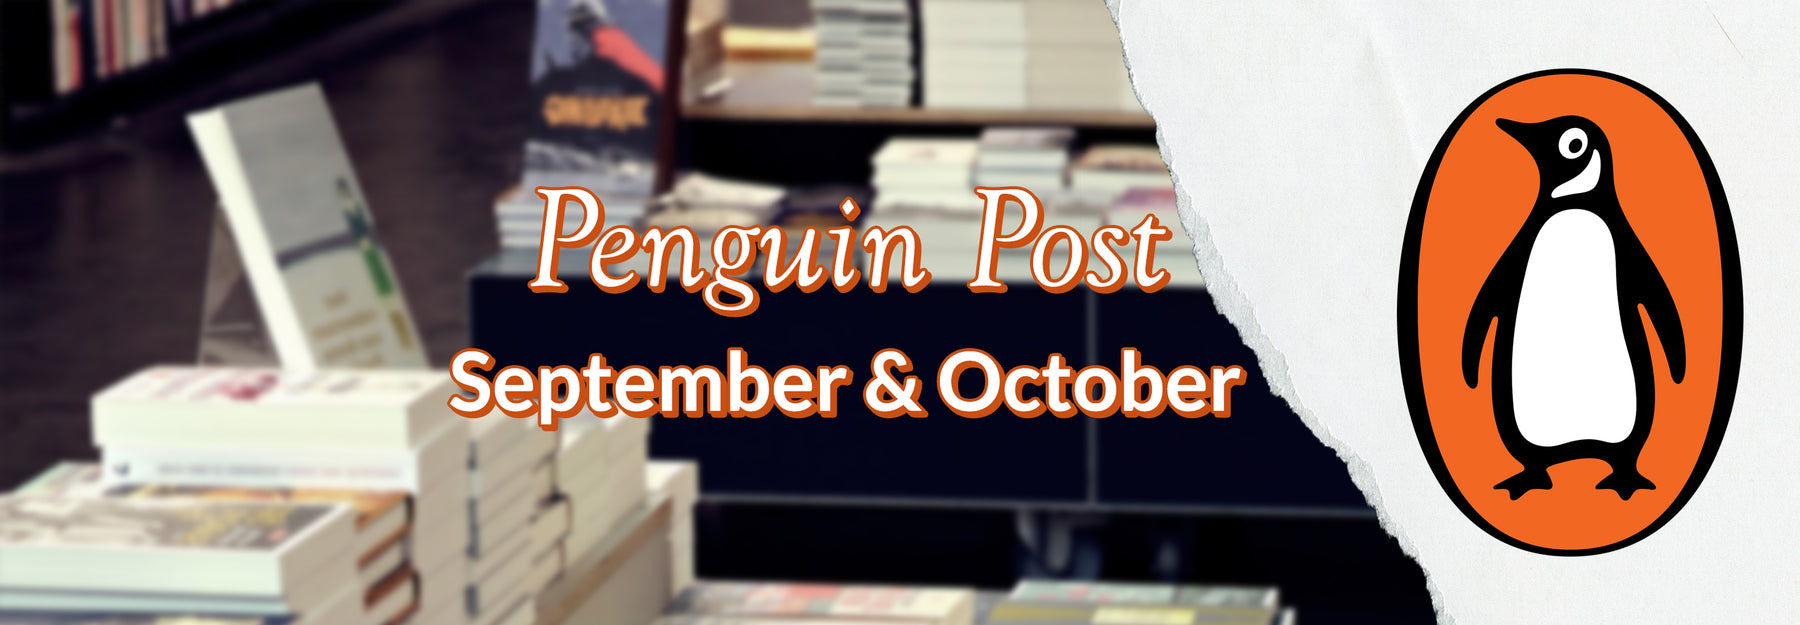 Wordsworth Special Edition of the Penguin Post for September & October